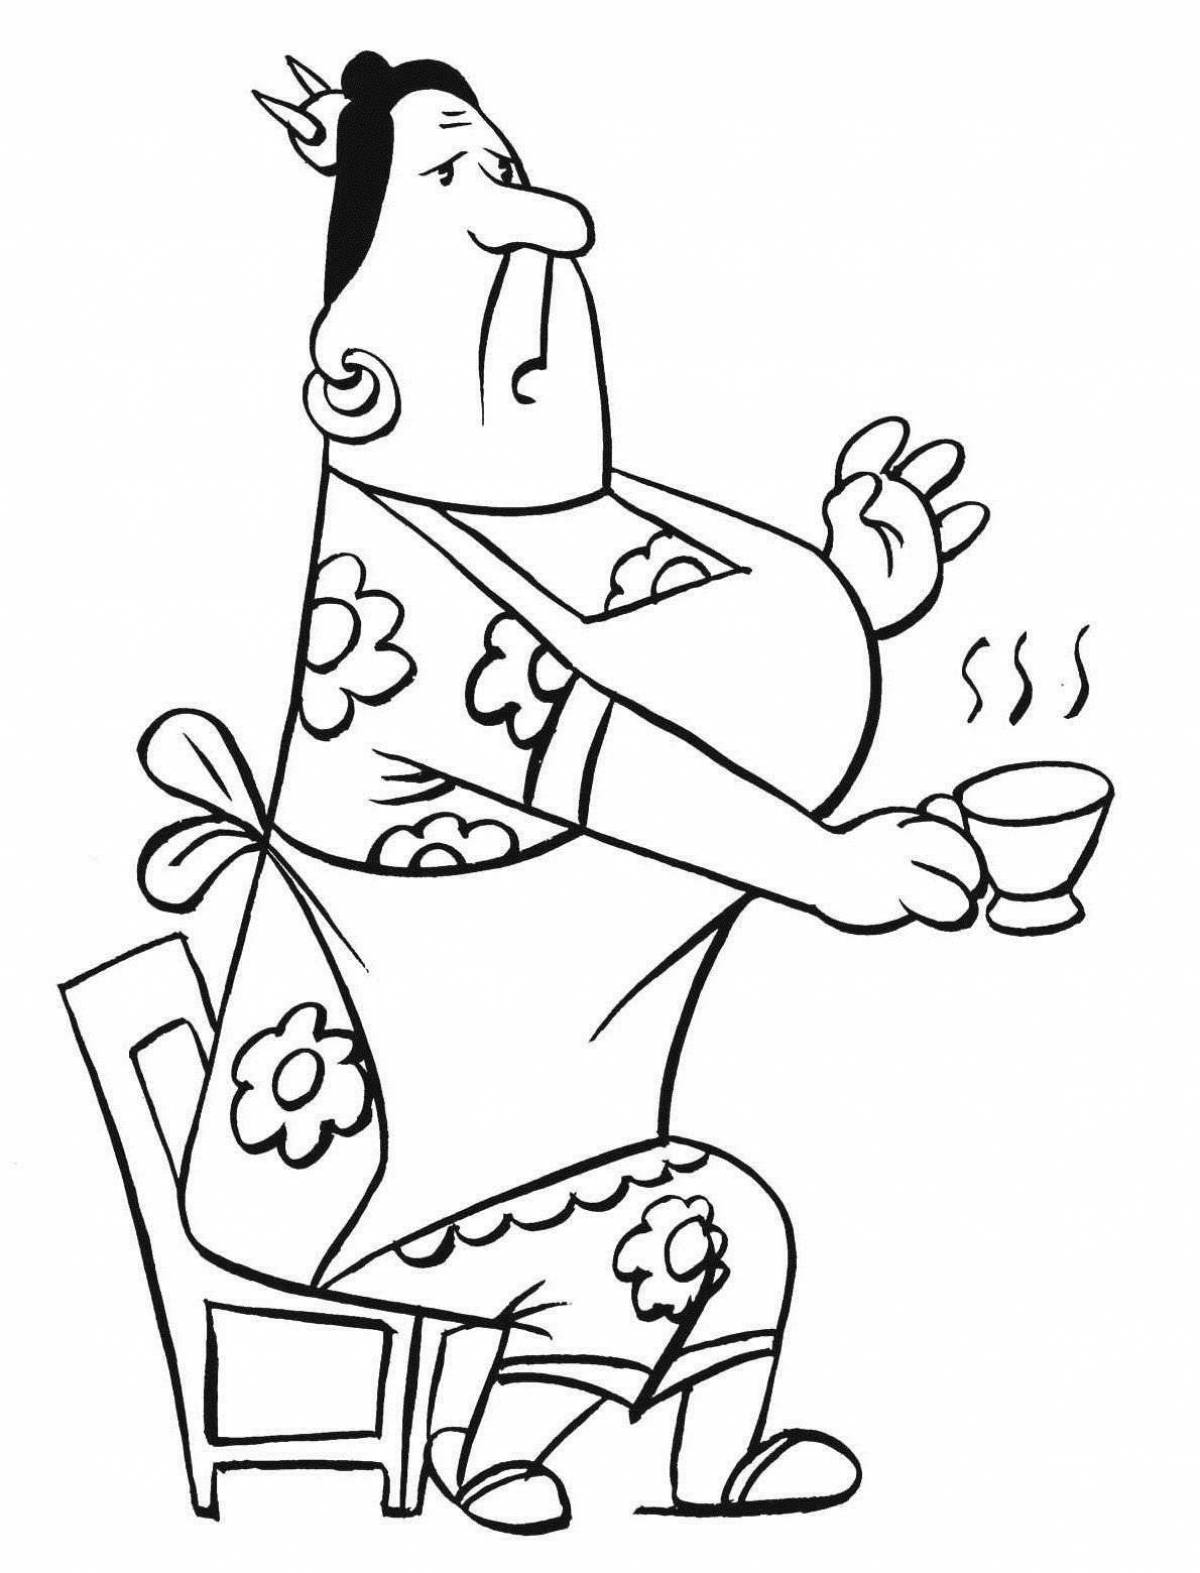 Lively drink coloring pages